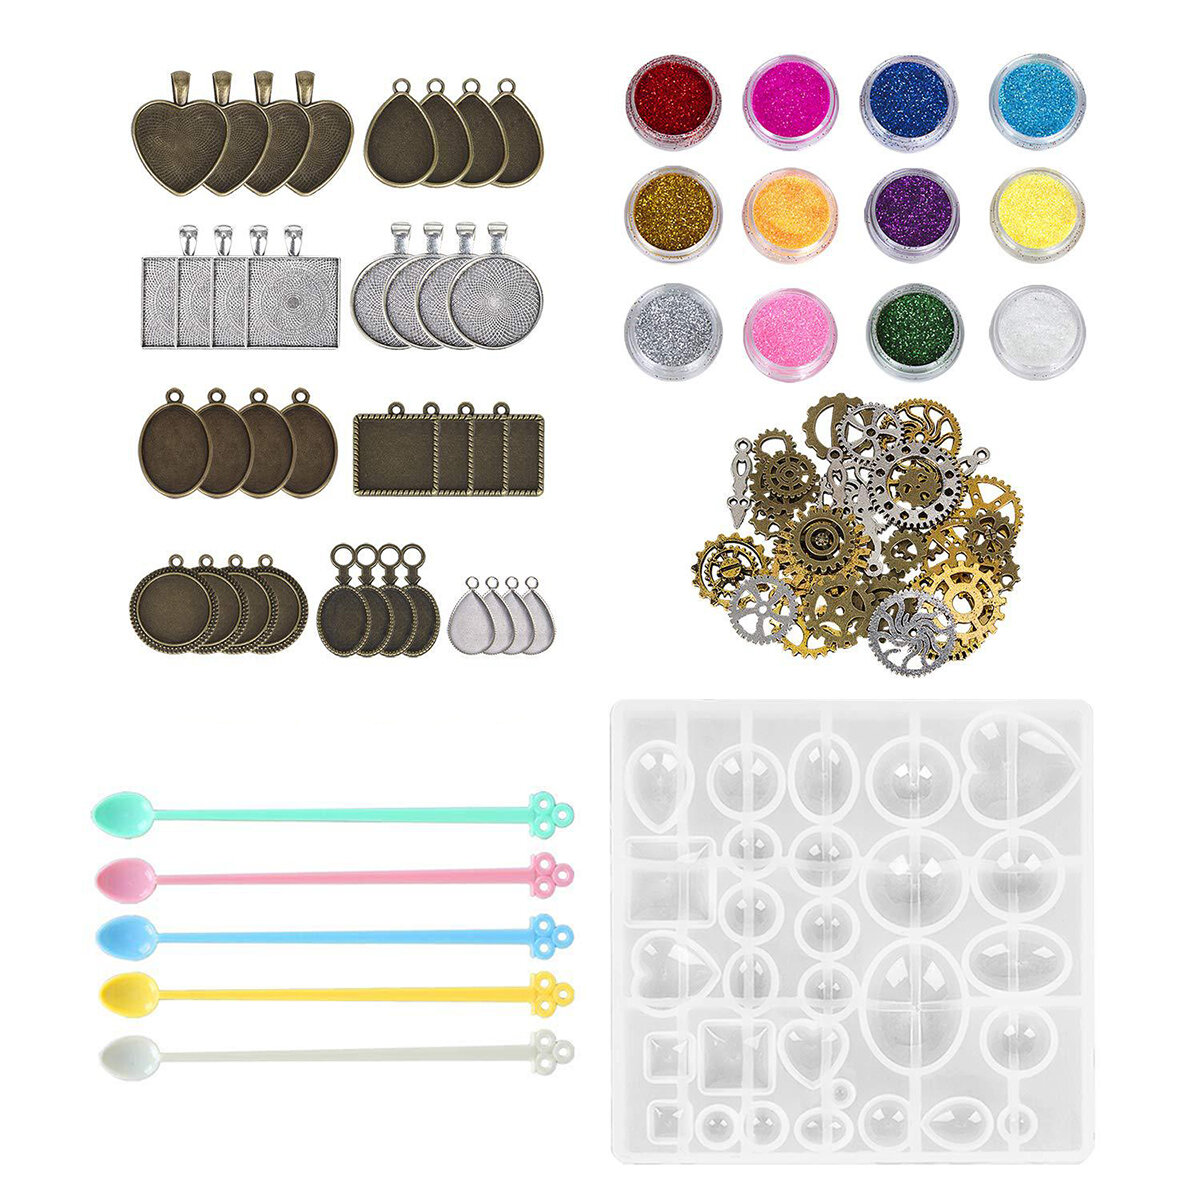 55Pcs/Set Silicone Casting Molds and Tools Jewelry Pendant Resin Mould DIY